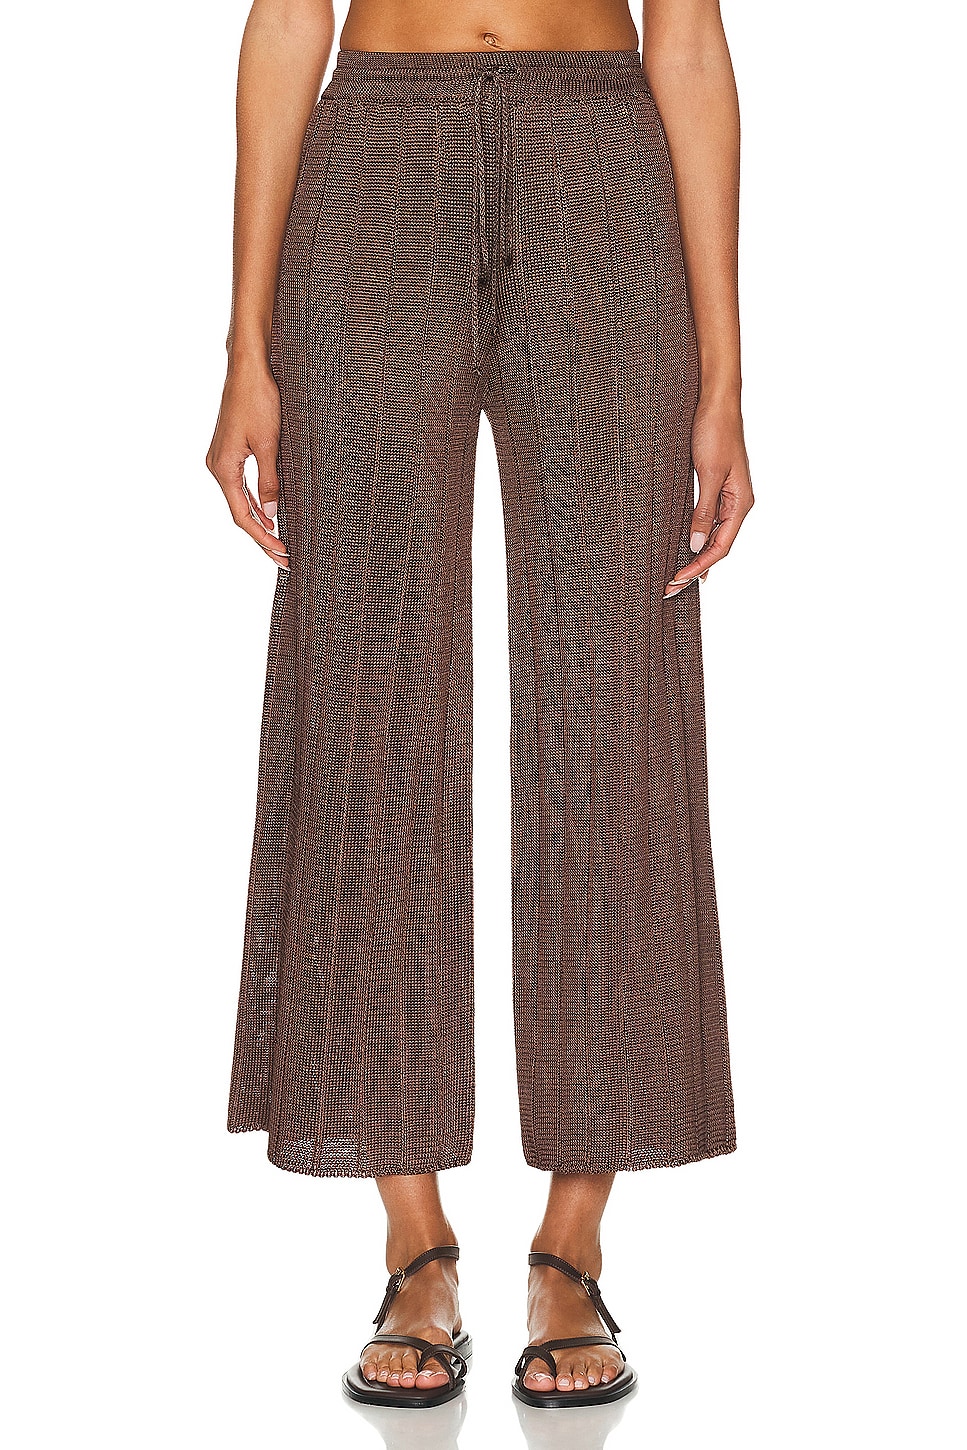 Image 1 of Calle Del Mar Wide Rib Pant in Chocolate